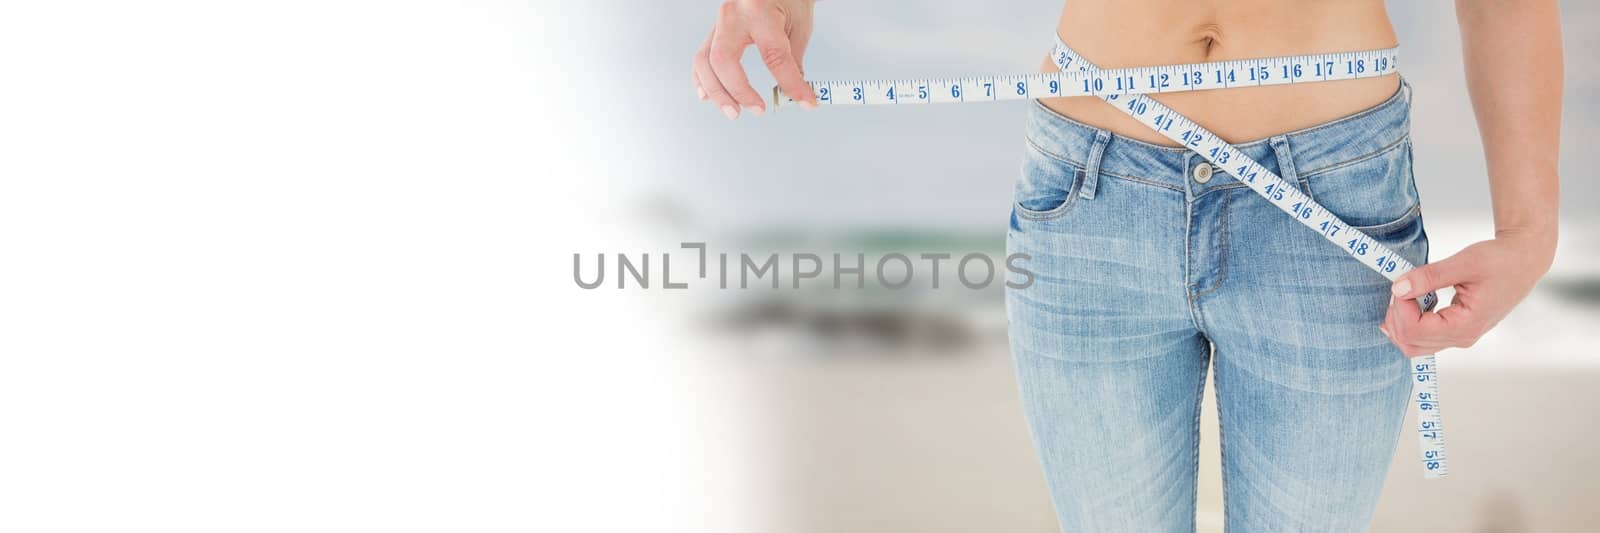 Digital composite of Woman measuring weight with measuring tape on waist on Summer beach with transition